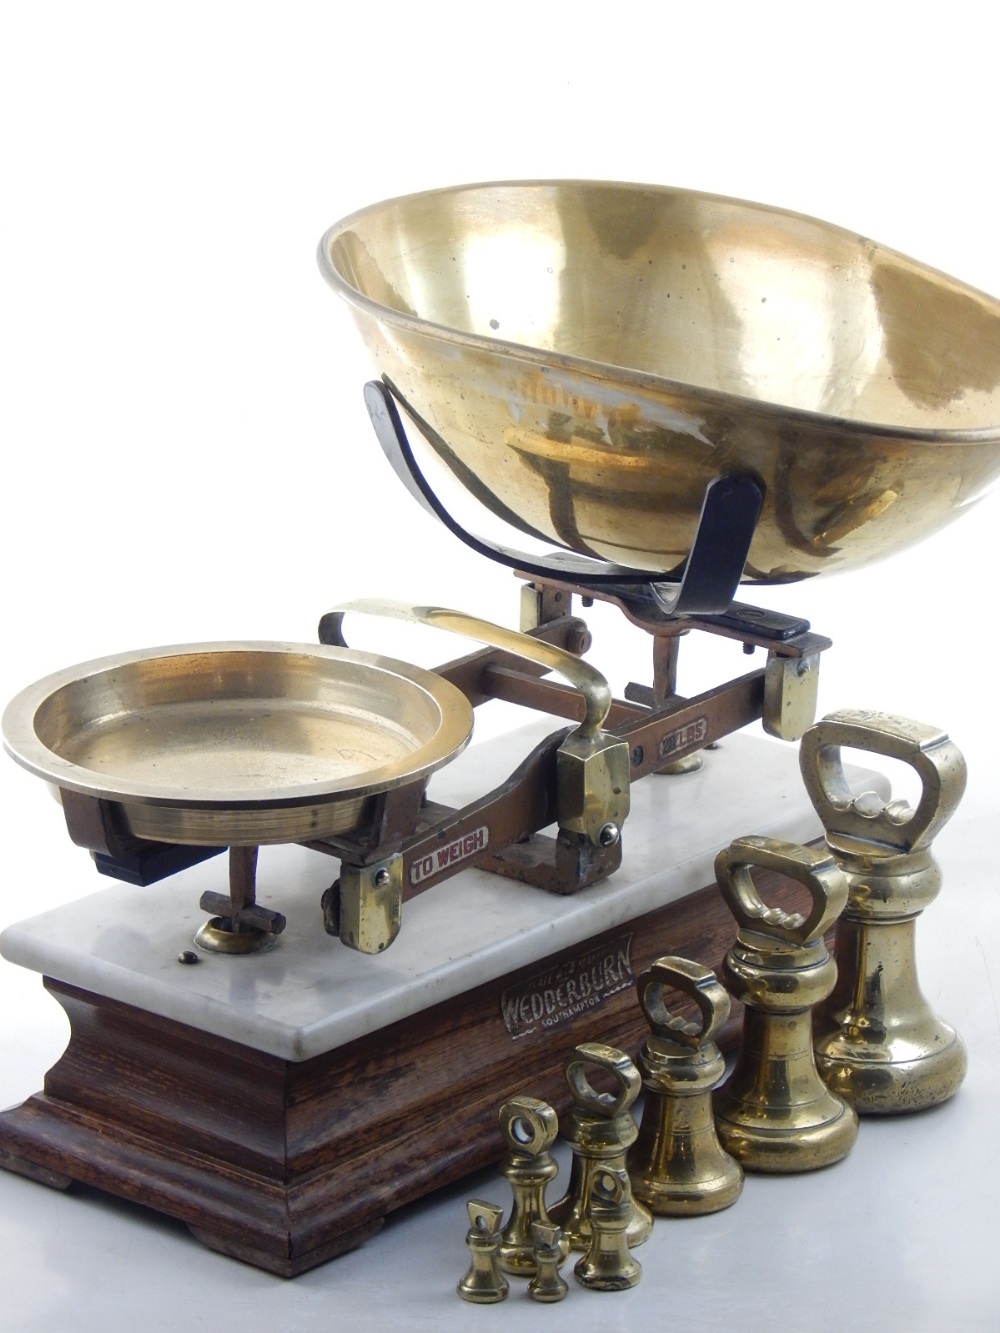 A pair of early 20th century scales, by Wedderburn of Southampton, with brass pans, - Image 2 of 3